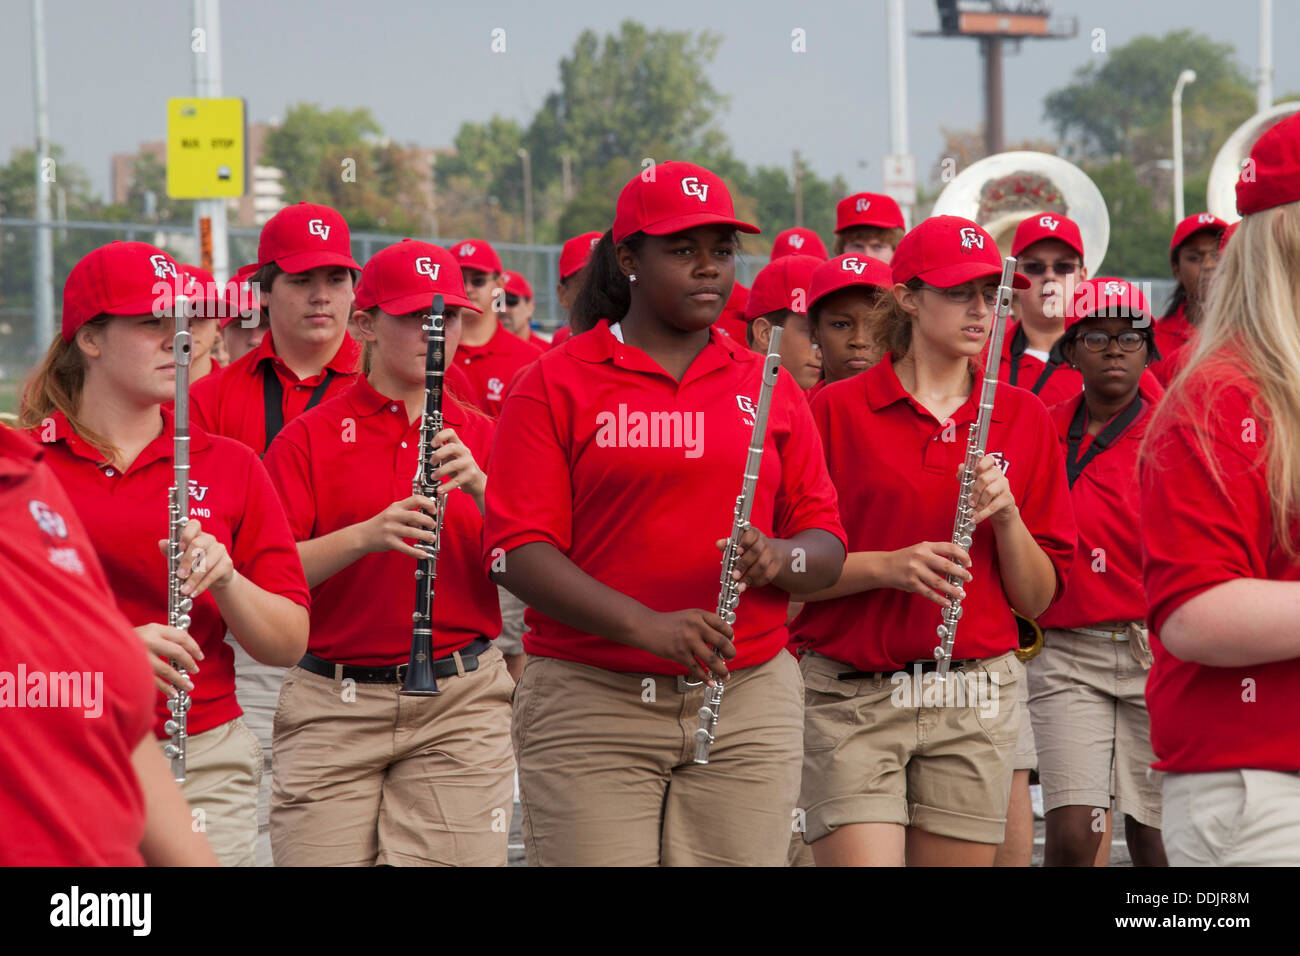 Detroit, Michigan - The Chippewa Valley High School marching band in Detroit's Labor Day parade. Stock Photo